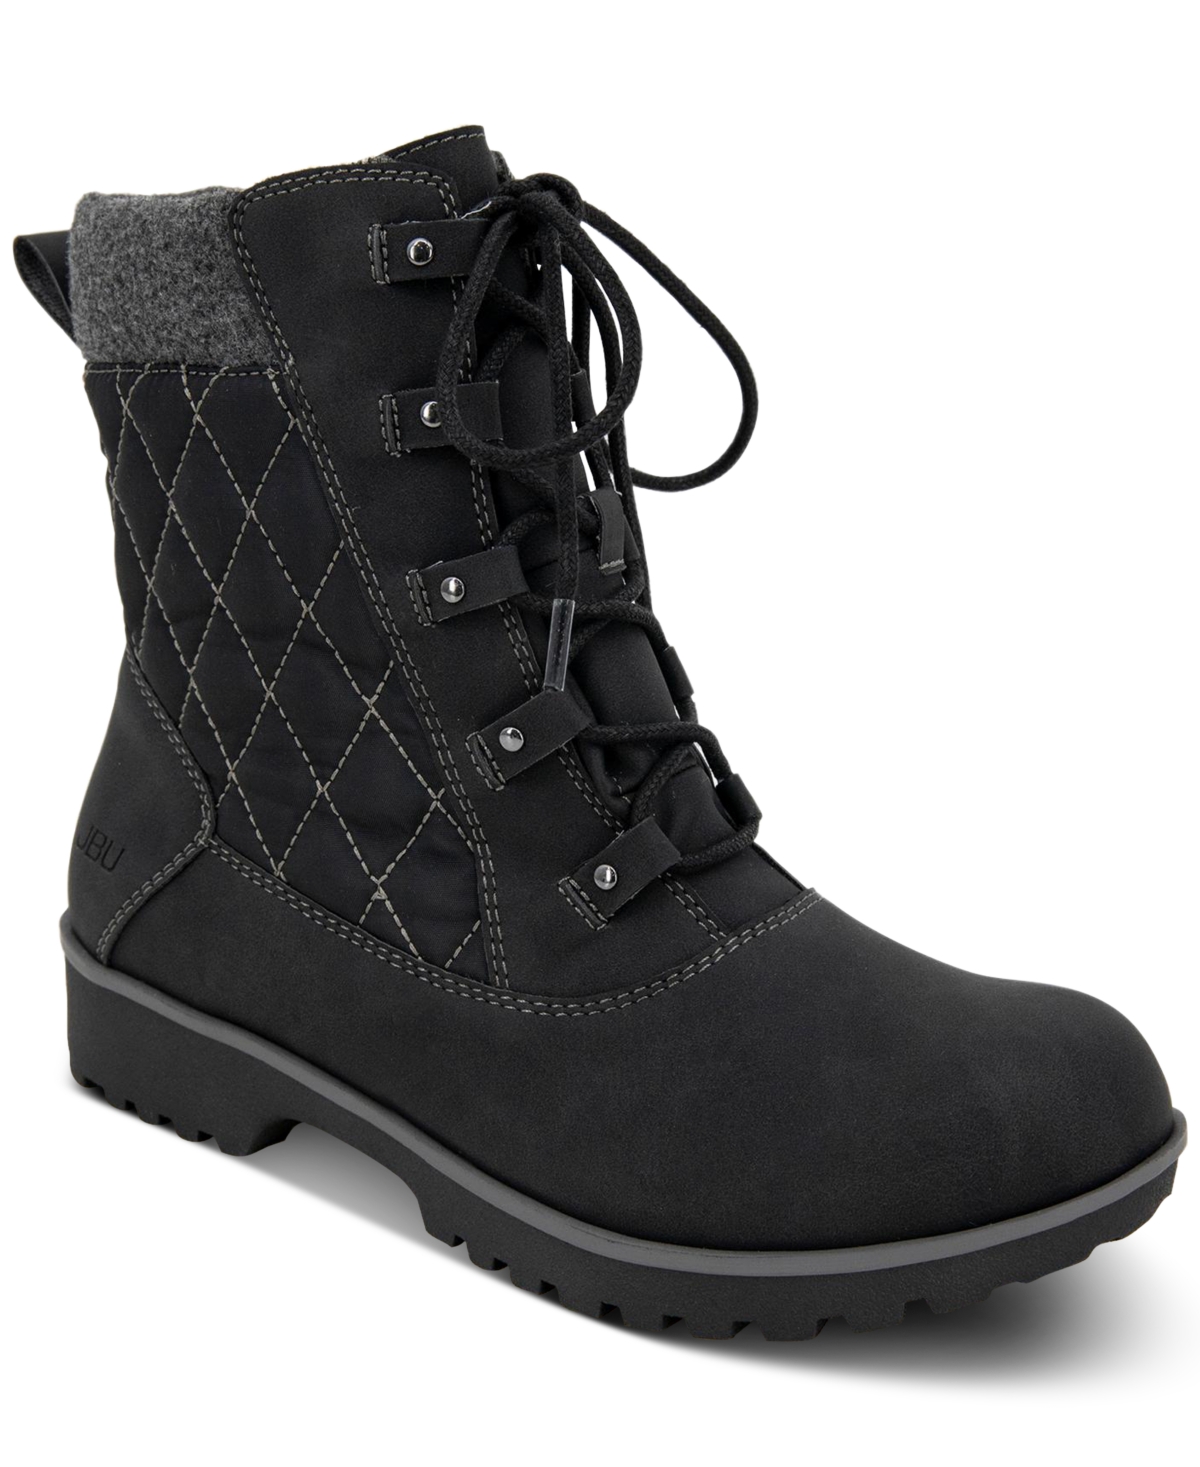 Jbu Women's Fargo Quilted Waterproof Cold-Weather Boots Women's Shoes